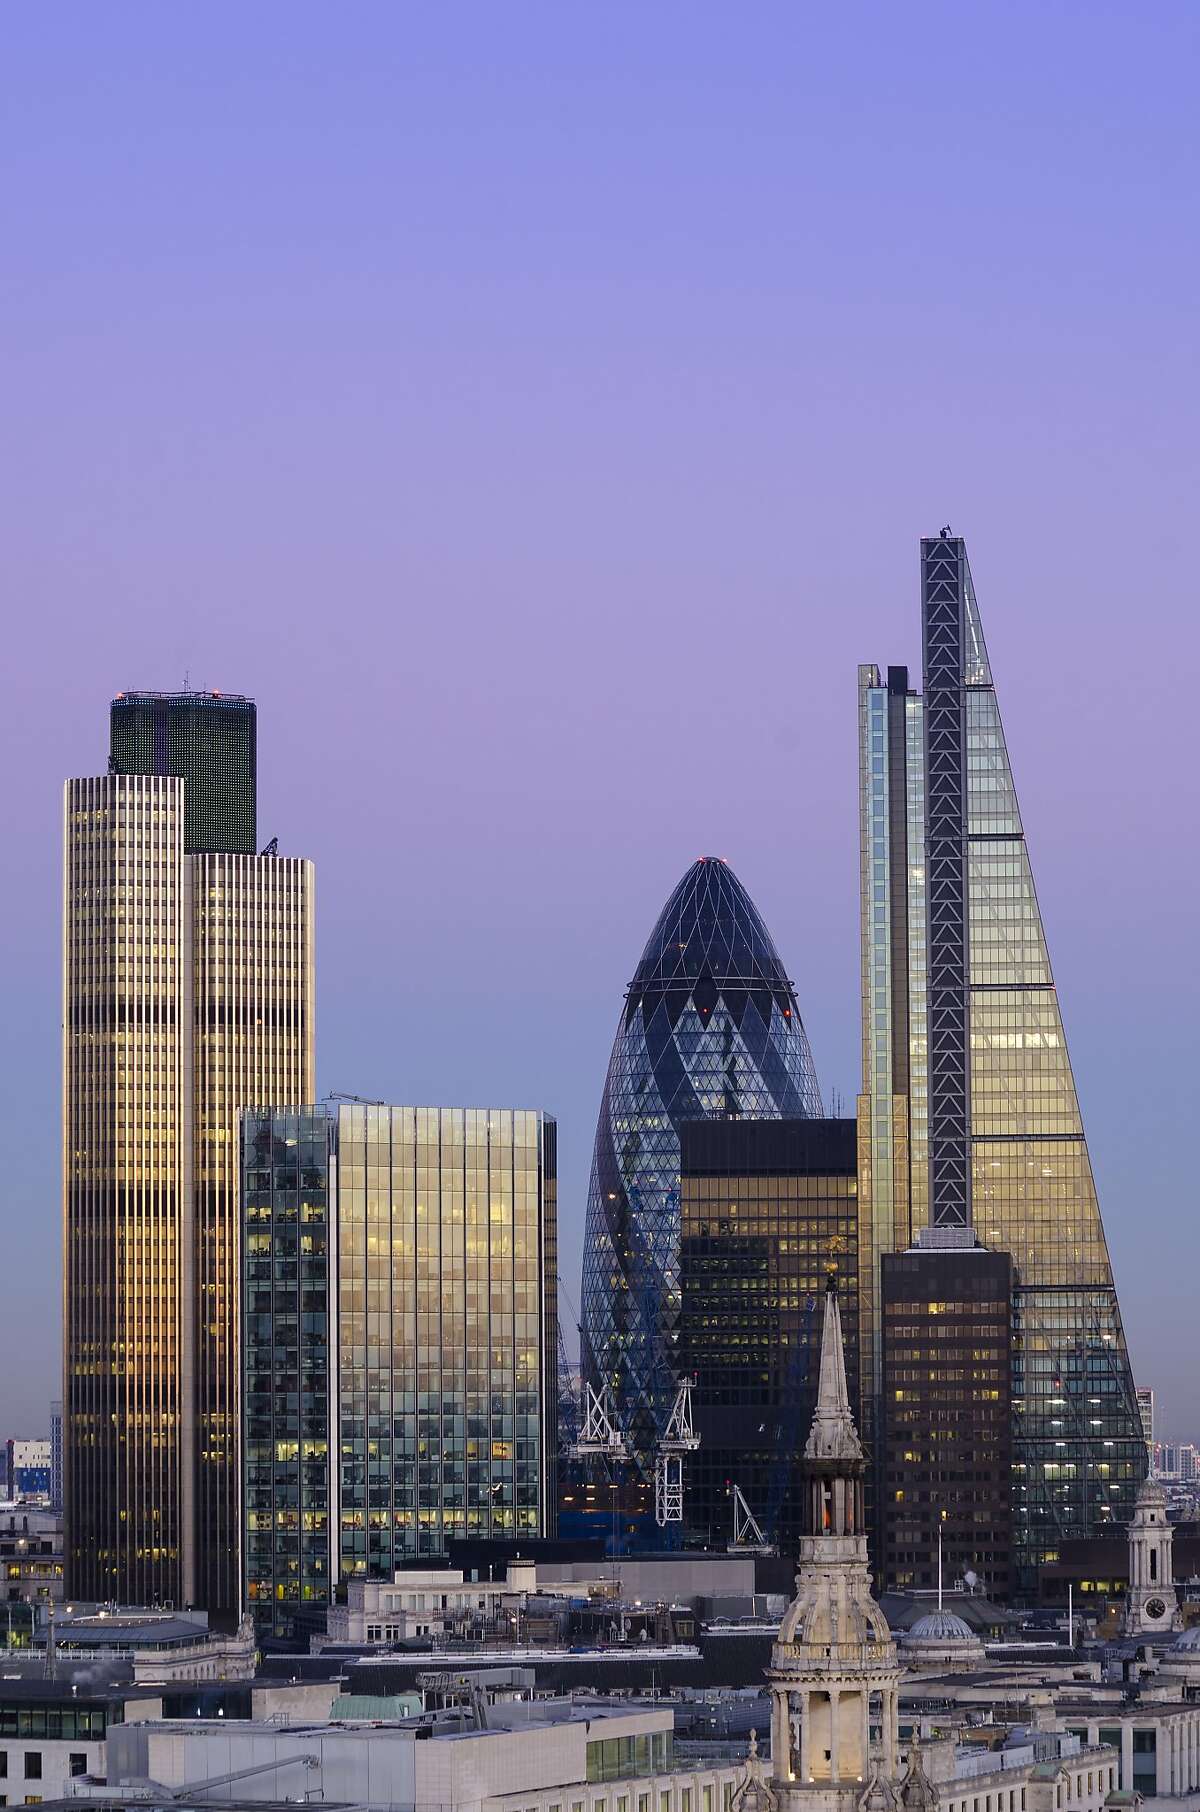 Elevated view of The City of London at dusk. The City is London's traditional financial and global business district. The distinctive 'Gherkin' skyscraper, Tower 42 and the recently completed 122 Leadenhall Street feature on the constantly changing skyline.